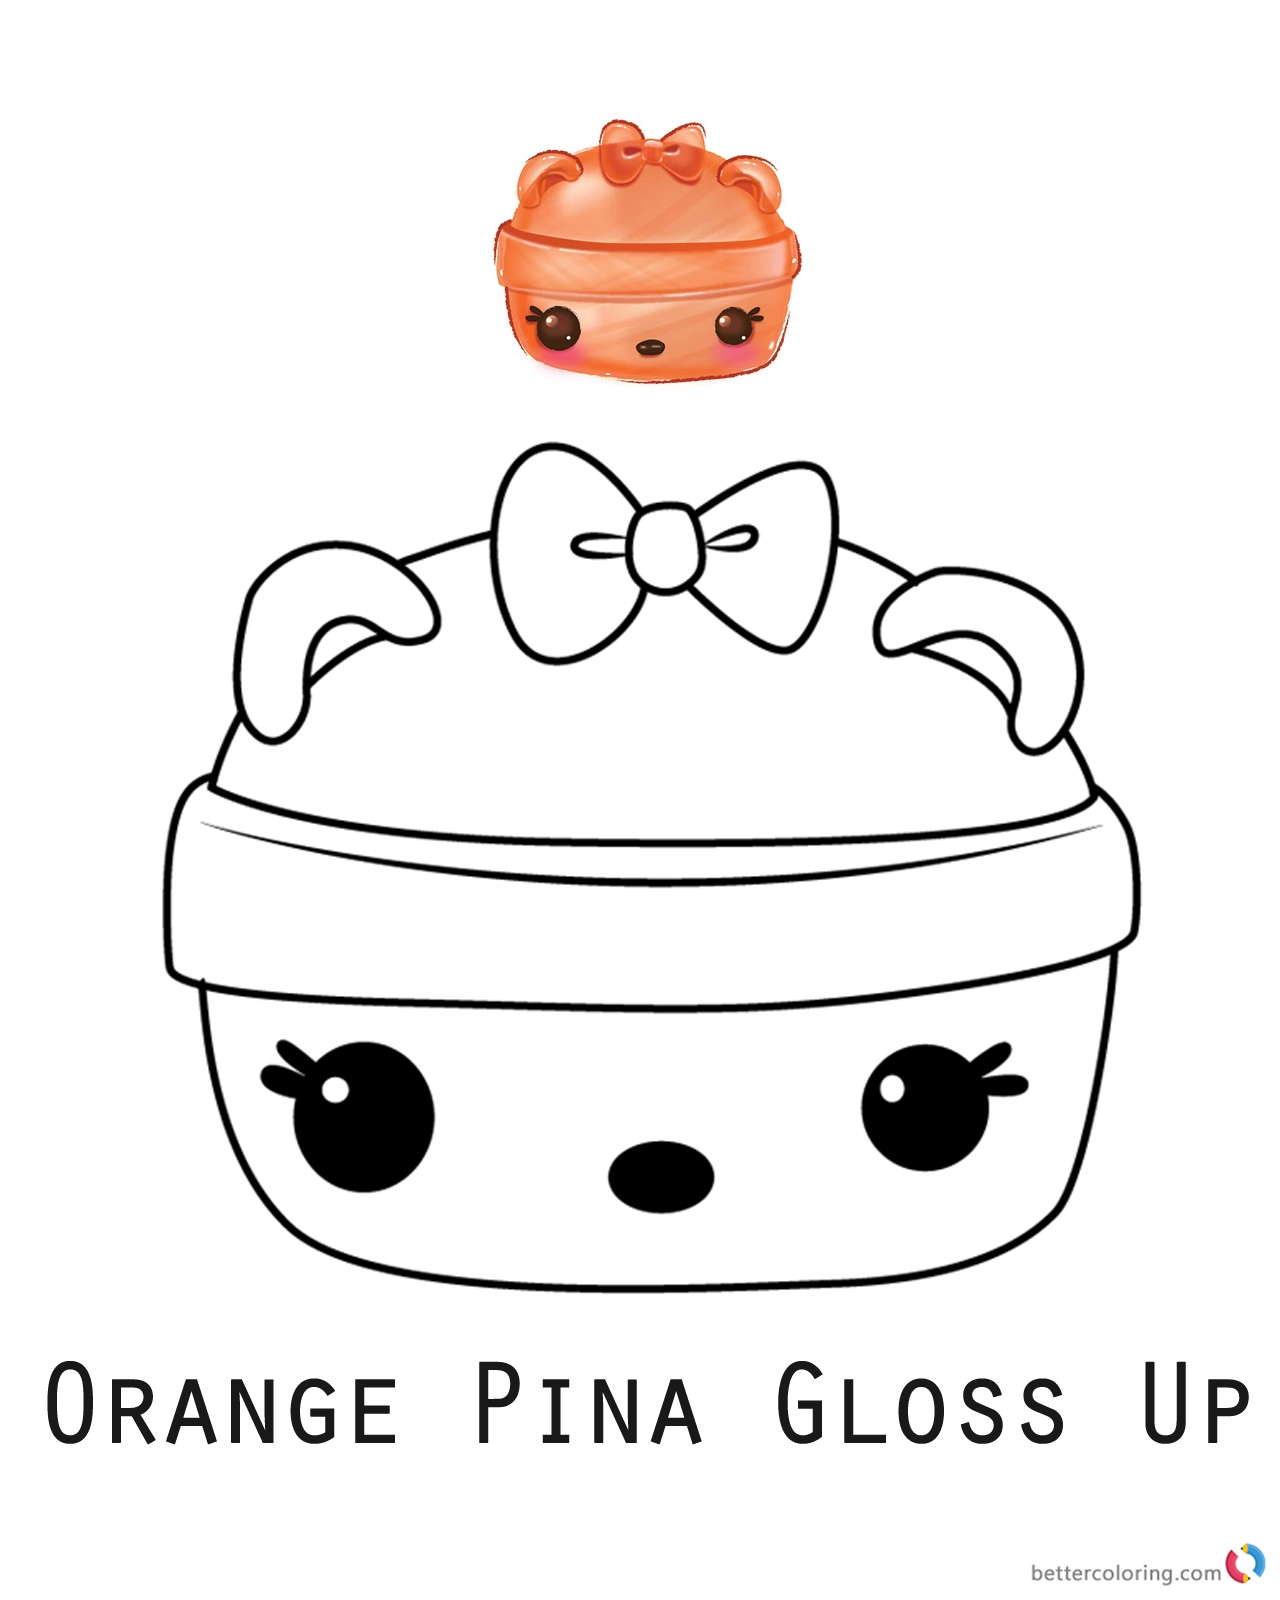 Orange Pina Gloss-Up from Num Noms coloring pages printable